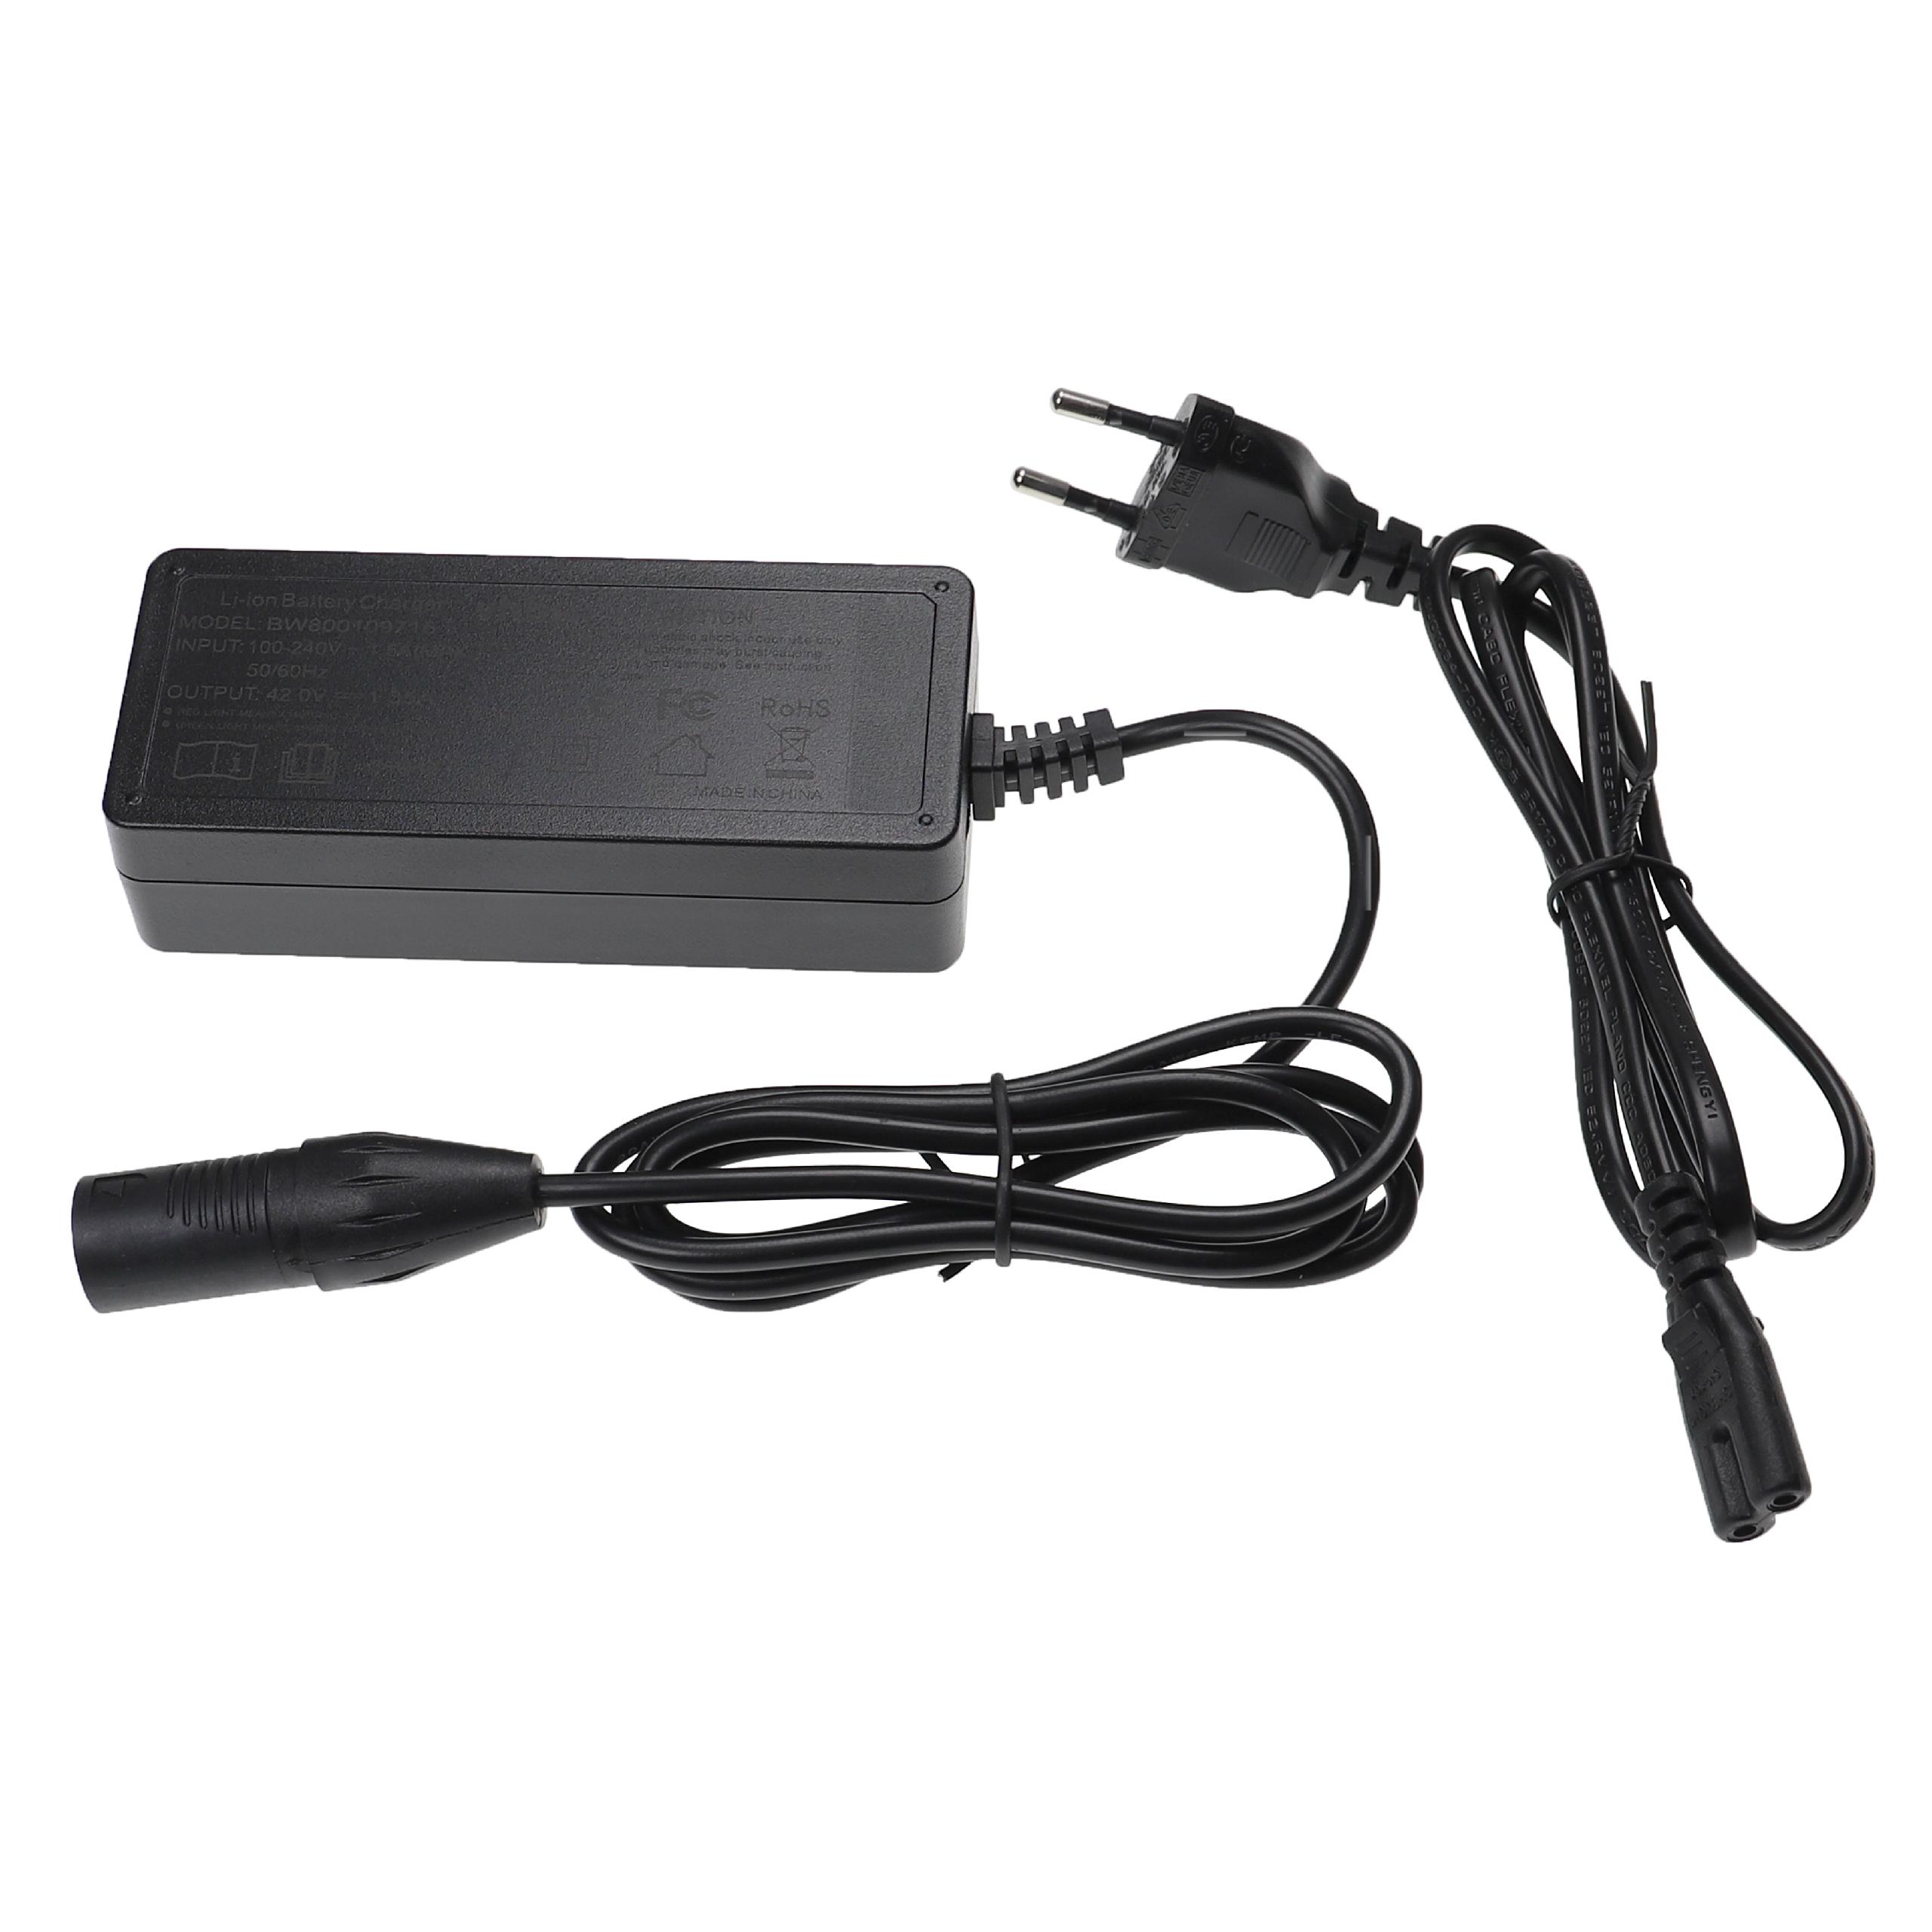 Charger suitable for Prophete Li-Ion E-Bike Battery etc. - For 36 V Batteries, With 3 Pin Connector, With XLR 